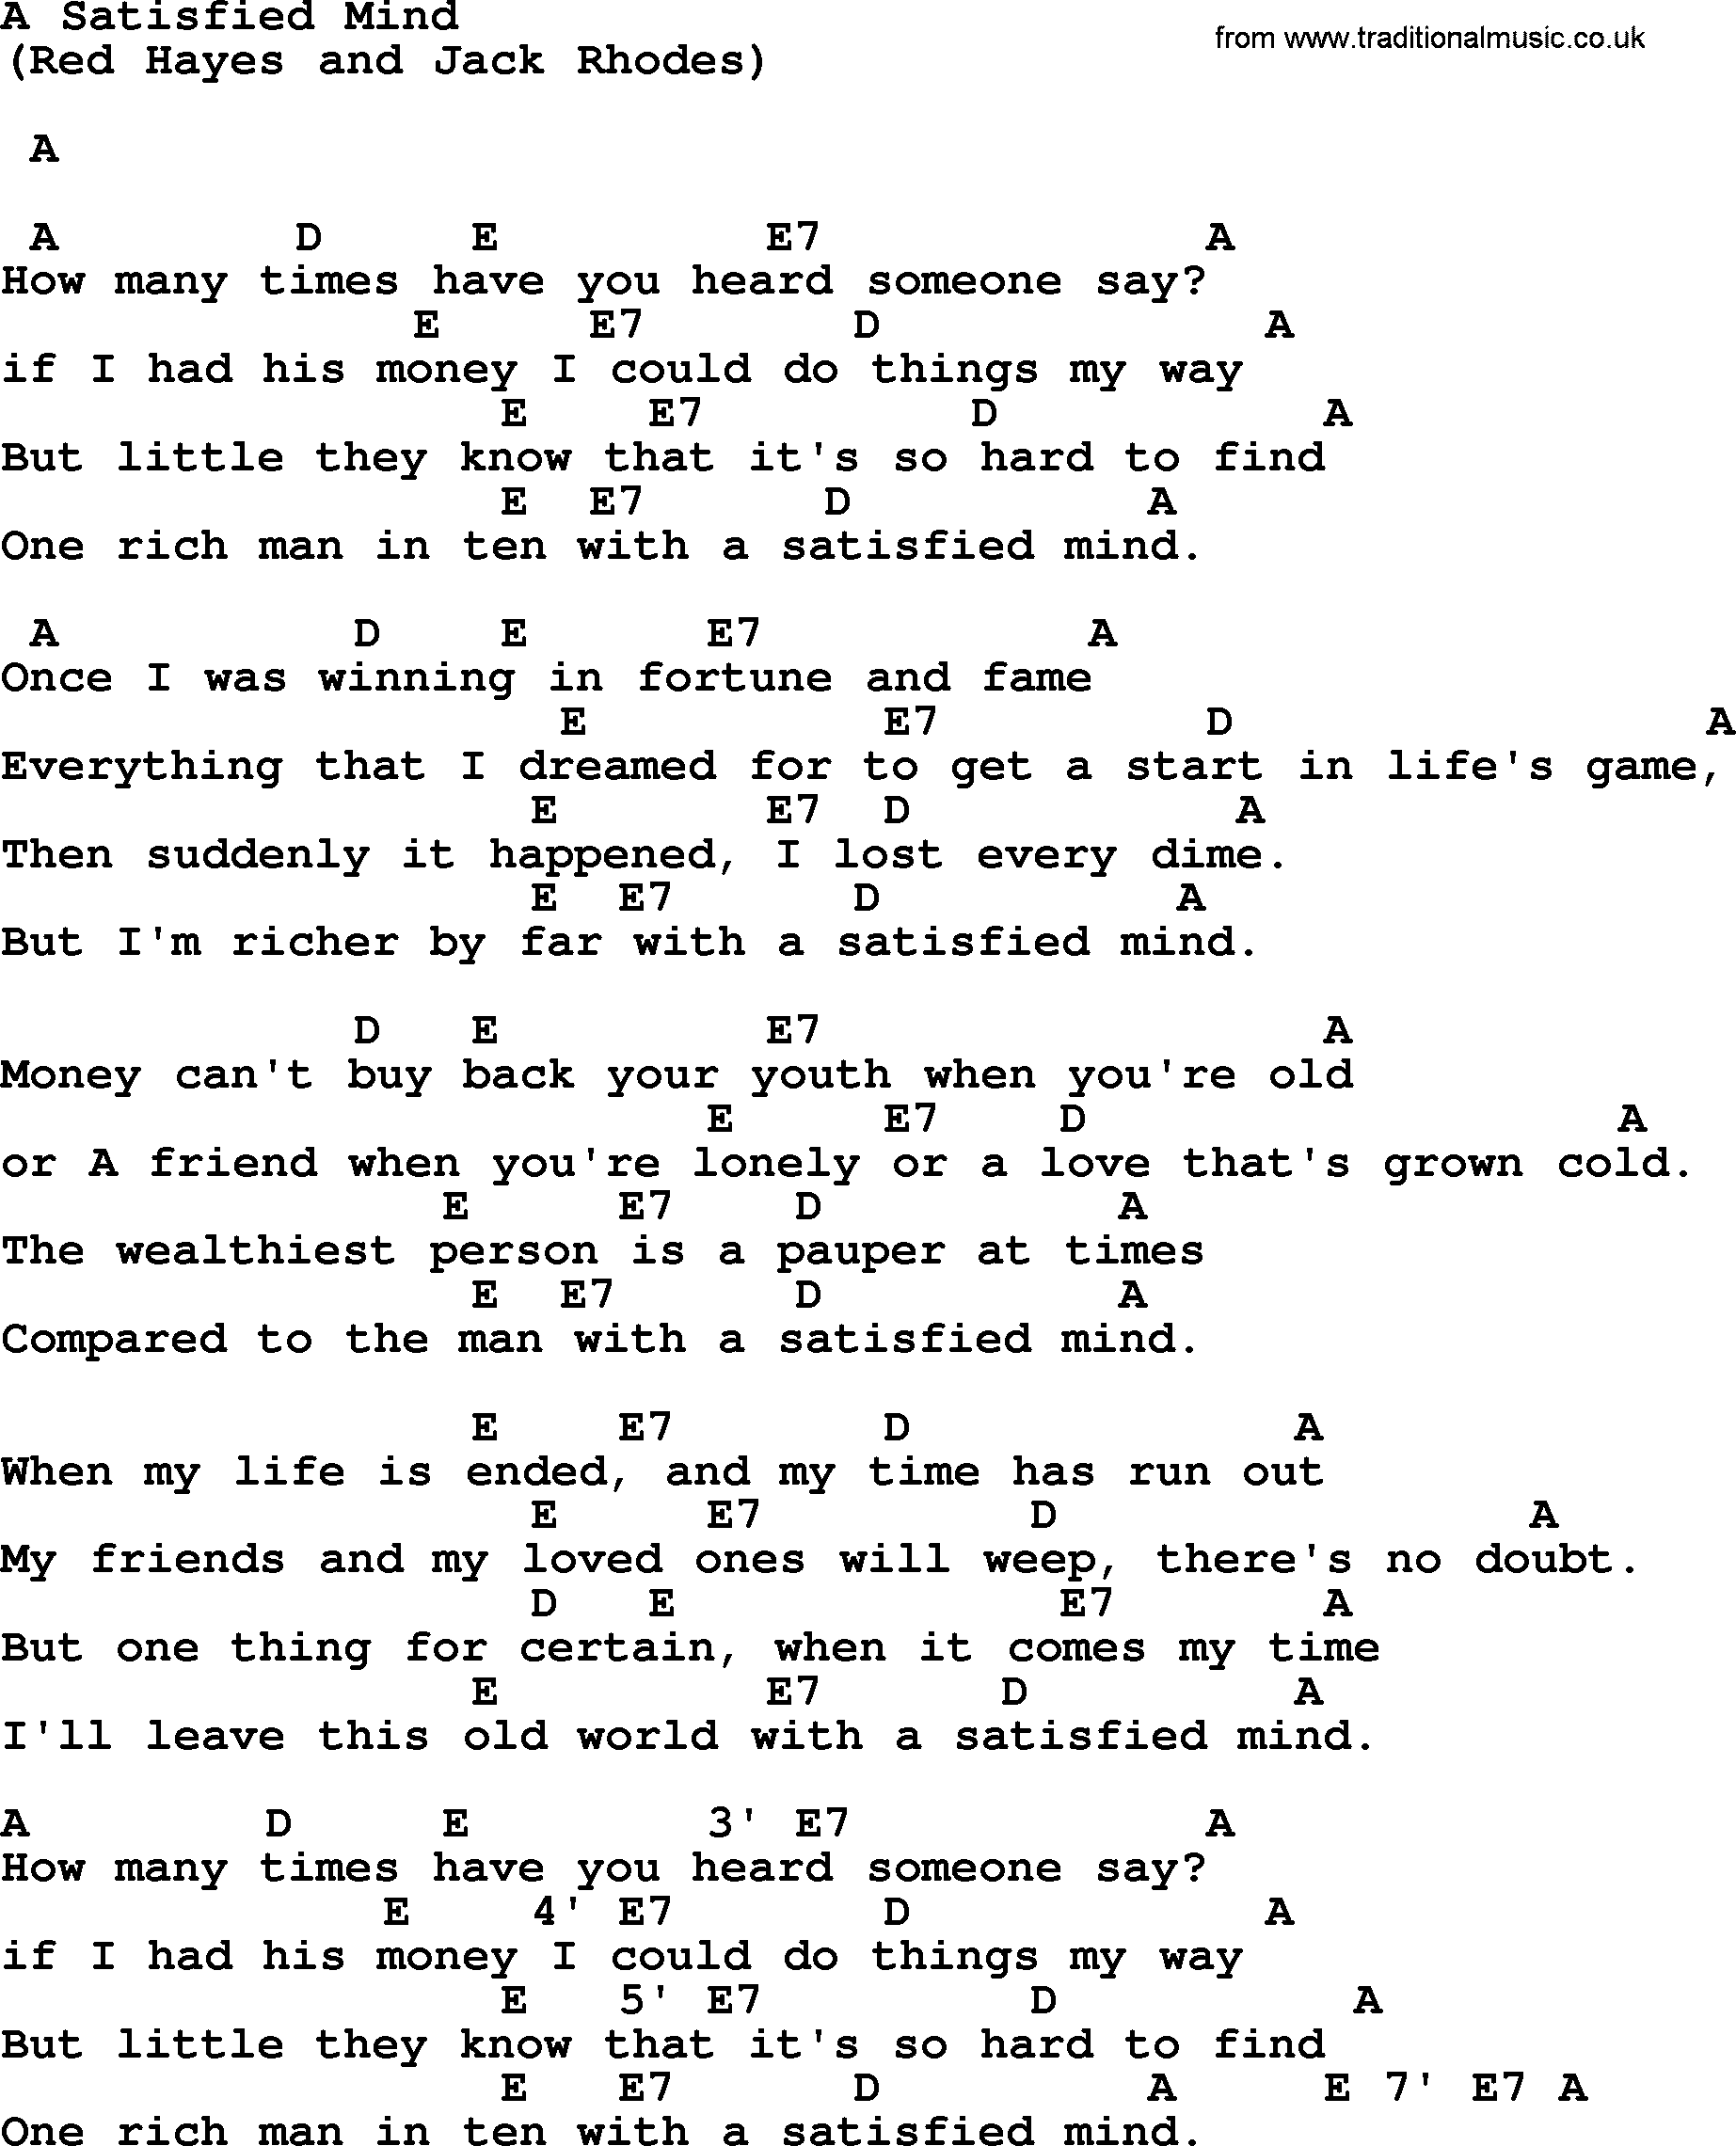 Johnny Cash song A Satisfied Mind, lyrics and chords